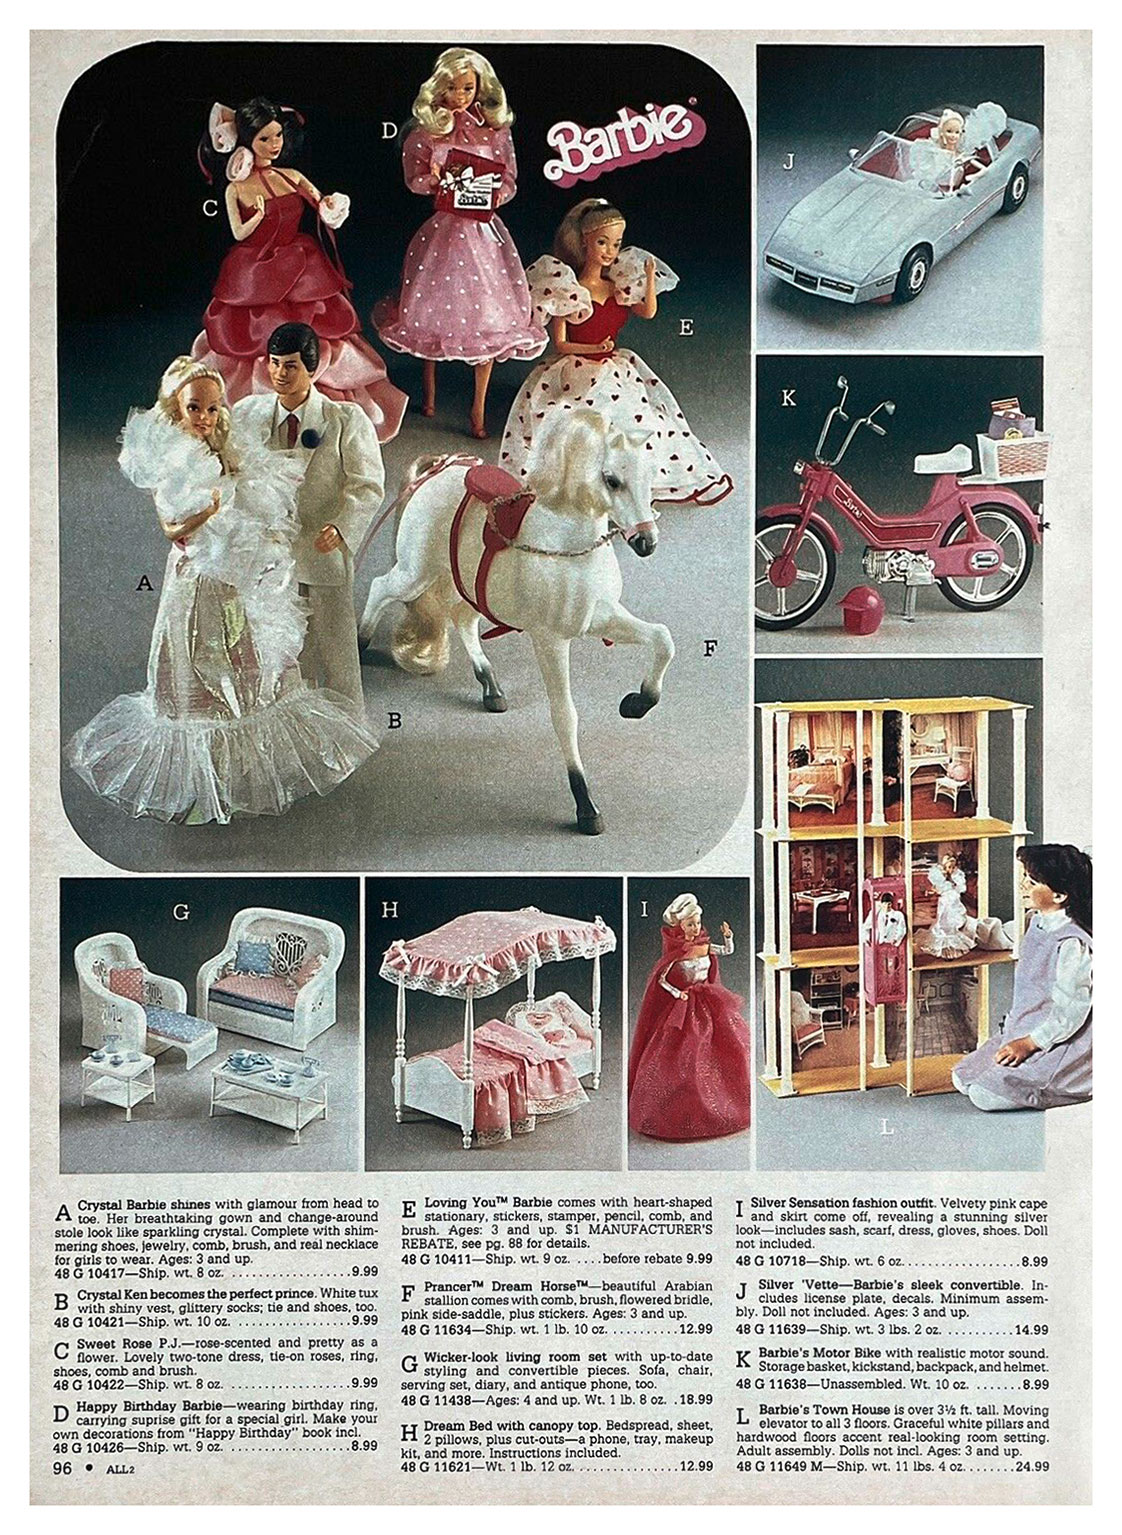 From 1984 Montgomery Ward Christmas catalogue